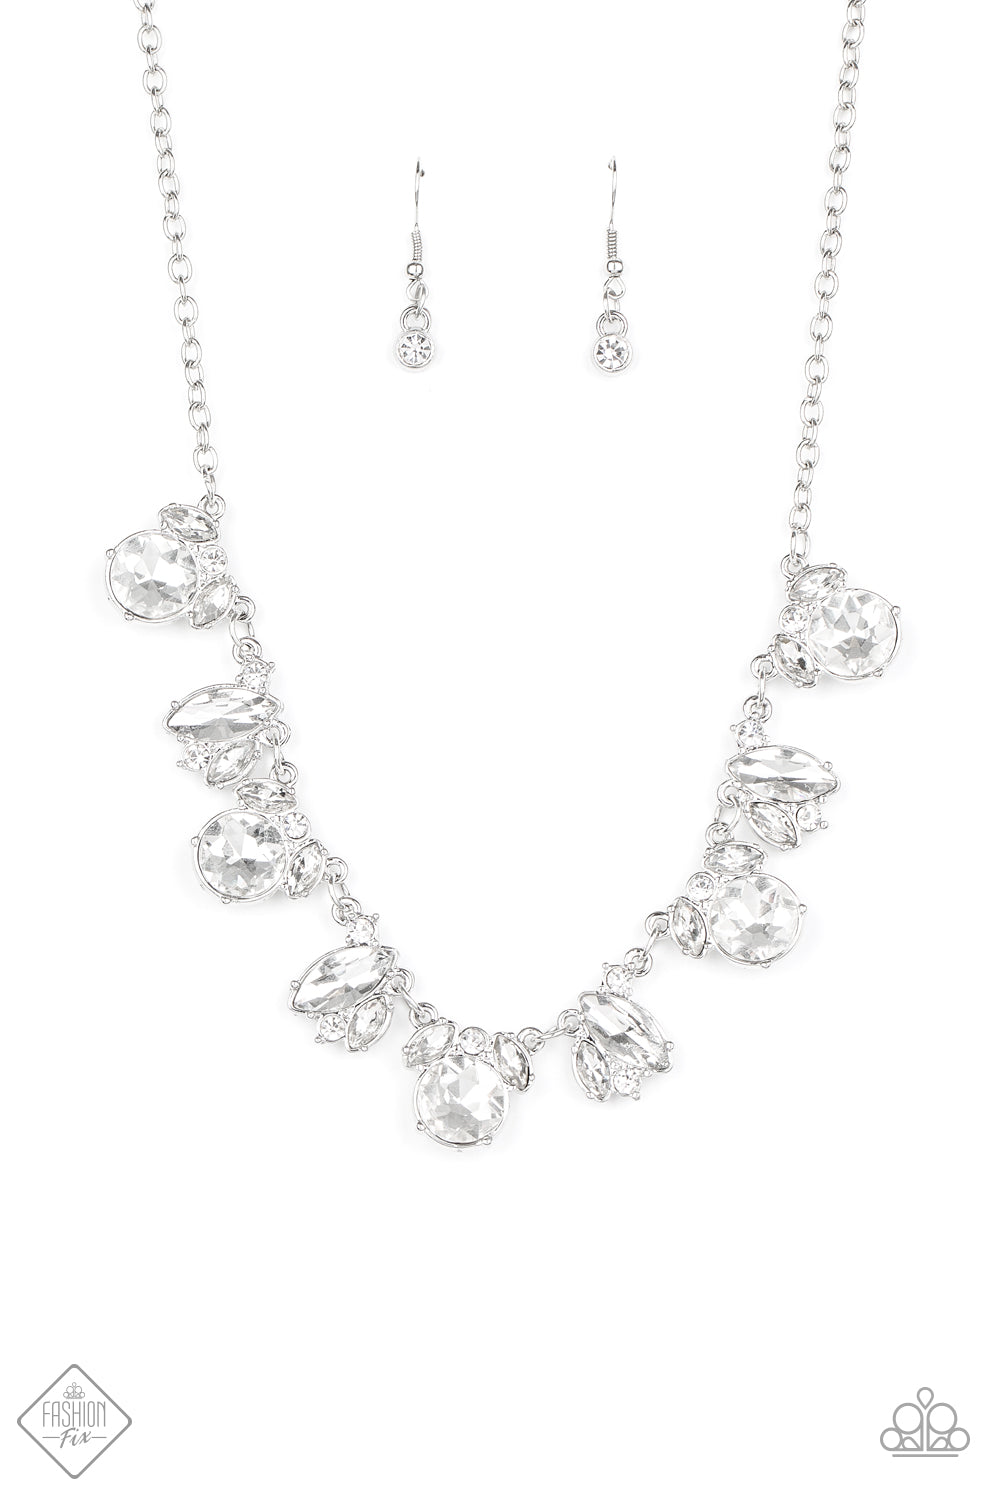 BLING to Attention - White Necklace August 2020